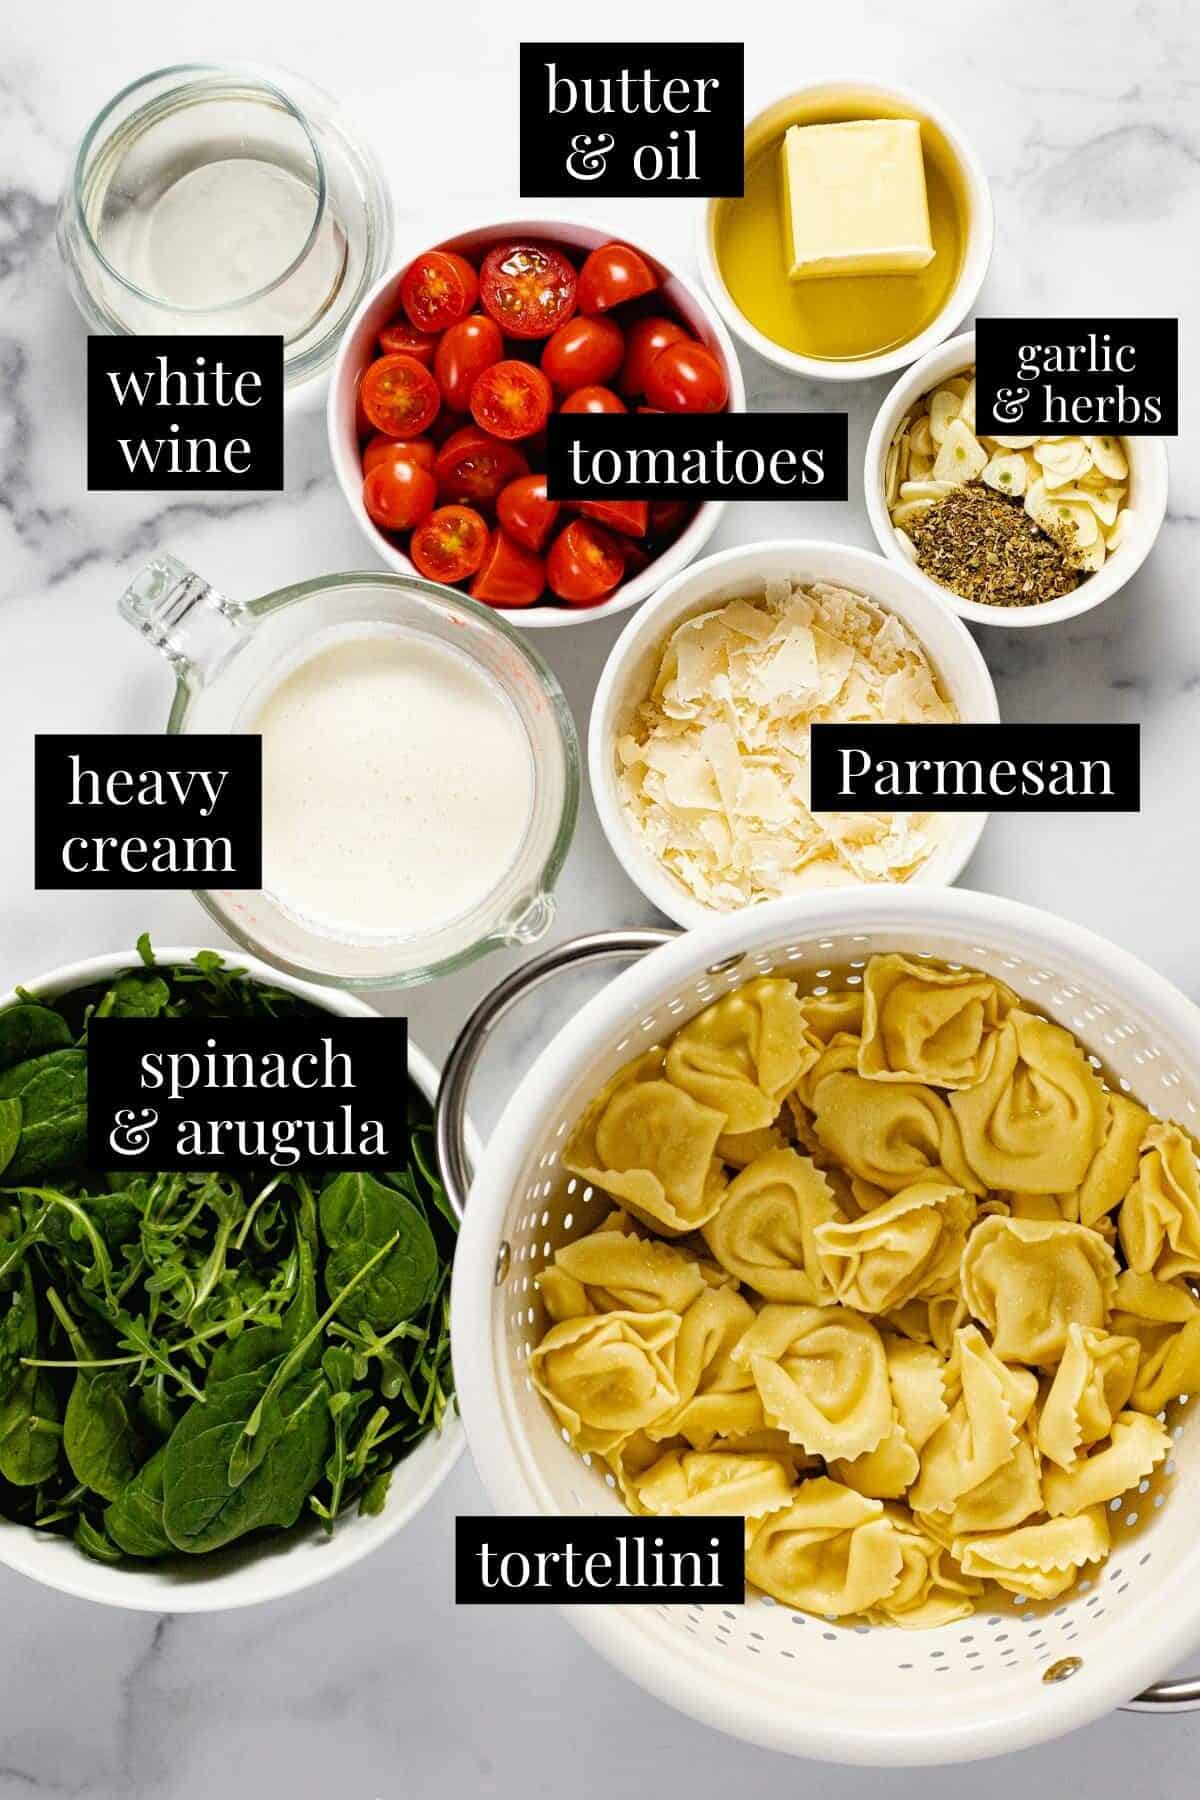 White marble counter top with bowls of ingredients to make cheese tortellini with cream sauce